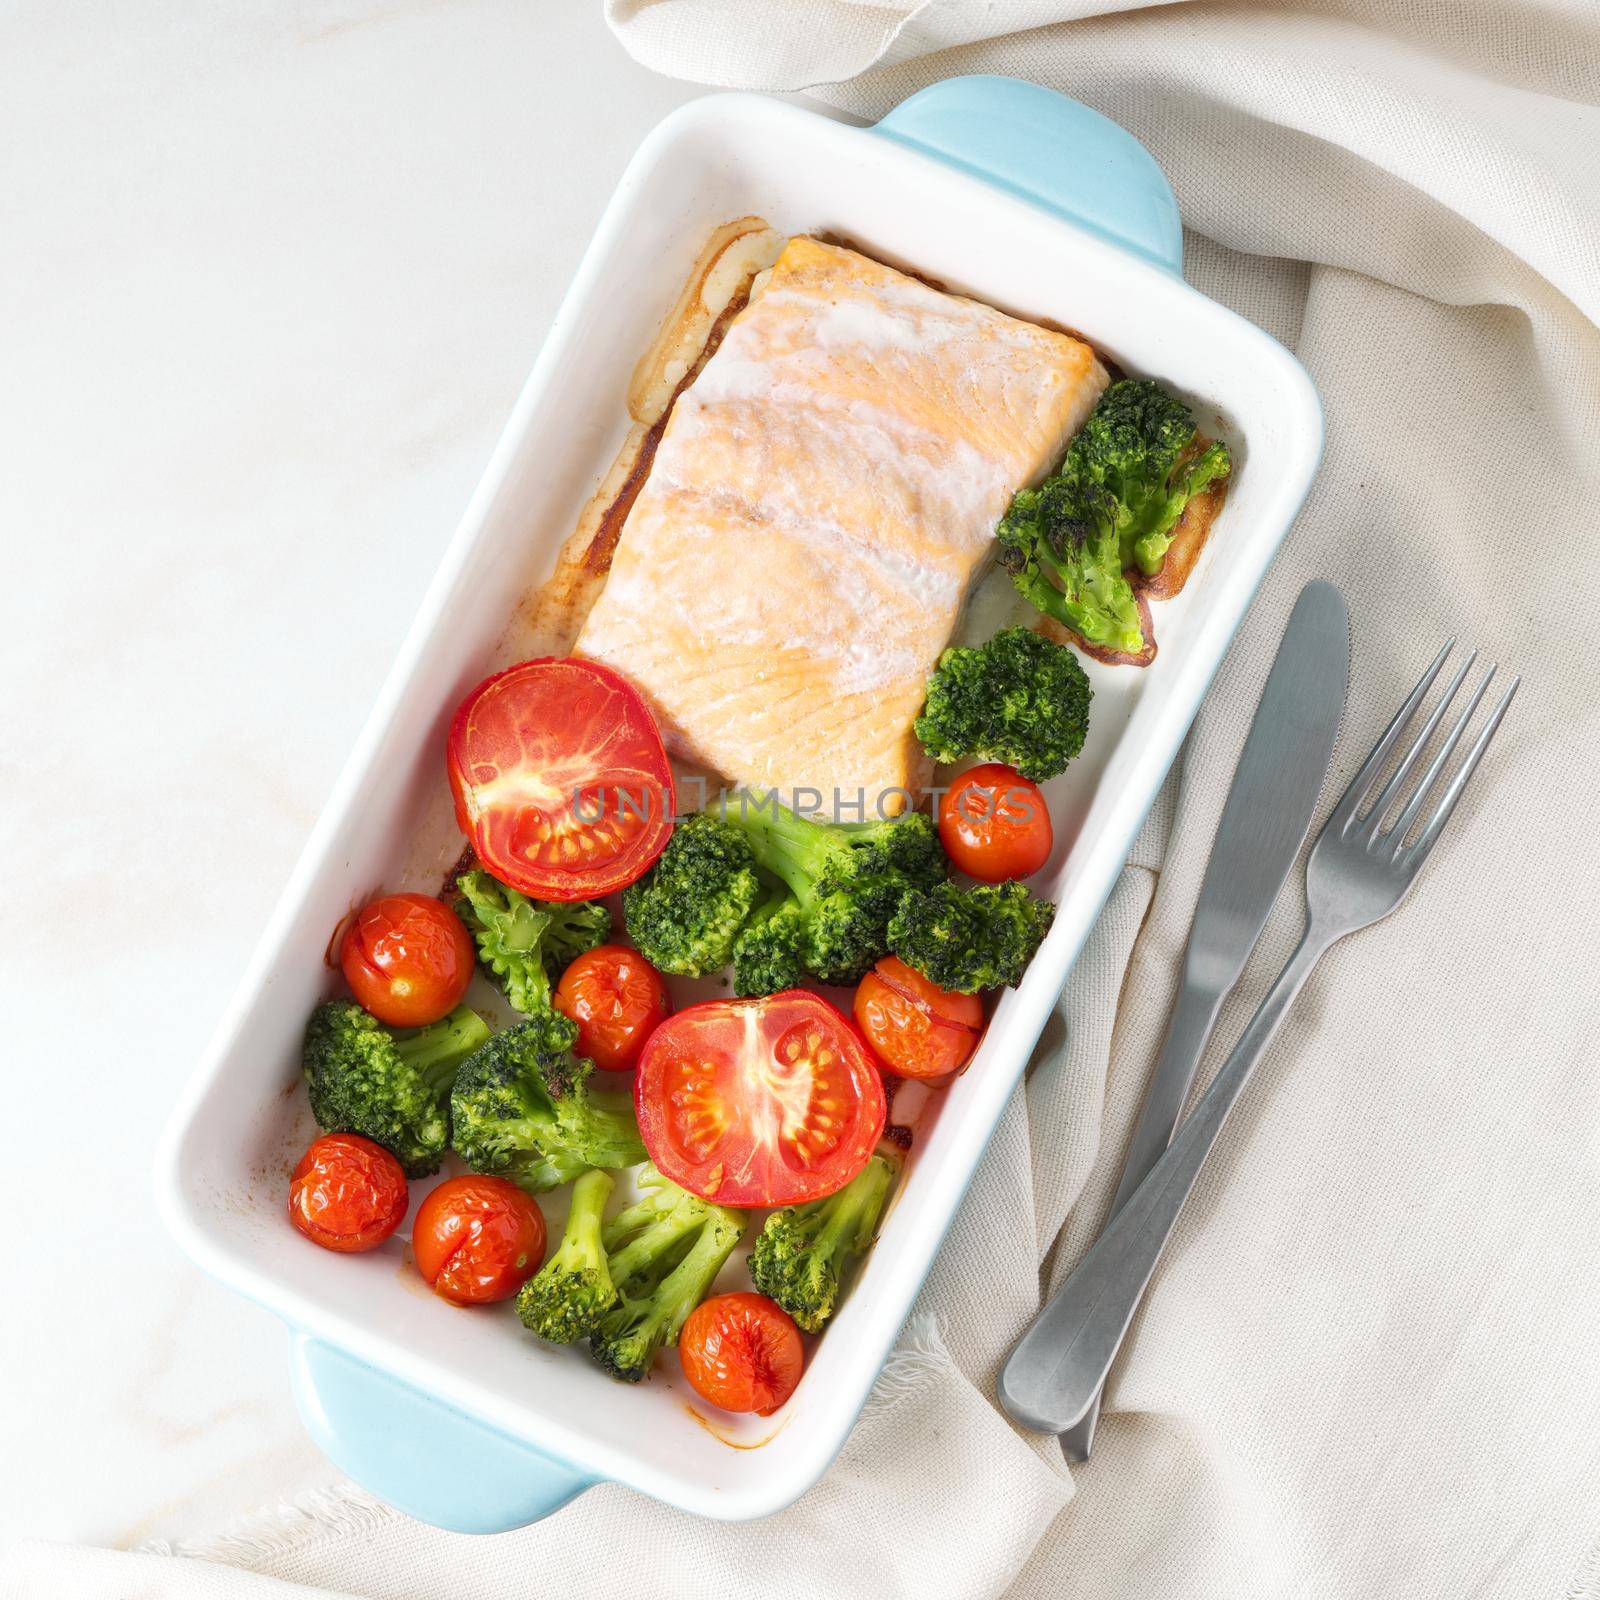 Fish salmon baked in oven with vegetables - broccoli, tomatoes. Healthy diet food, the white marble backdrop, top view.